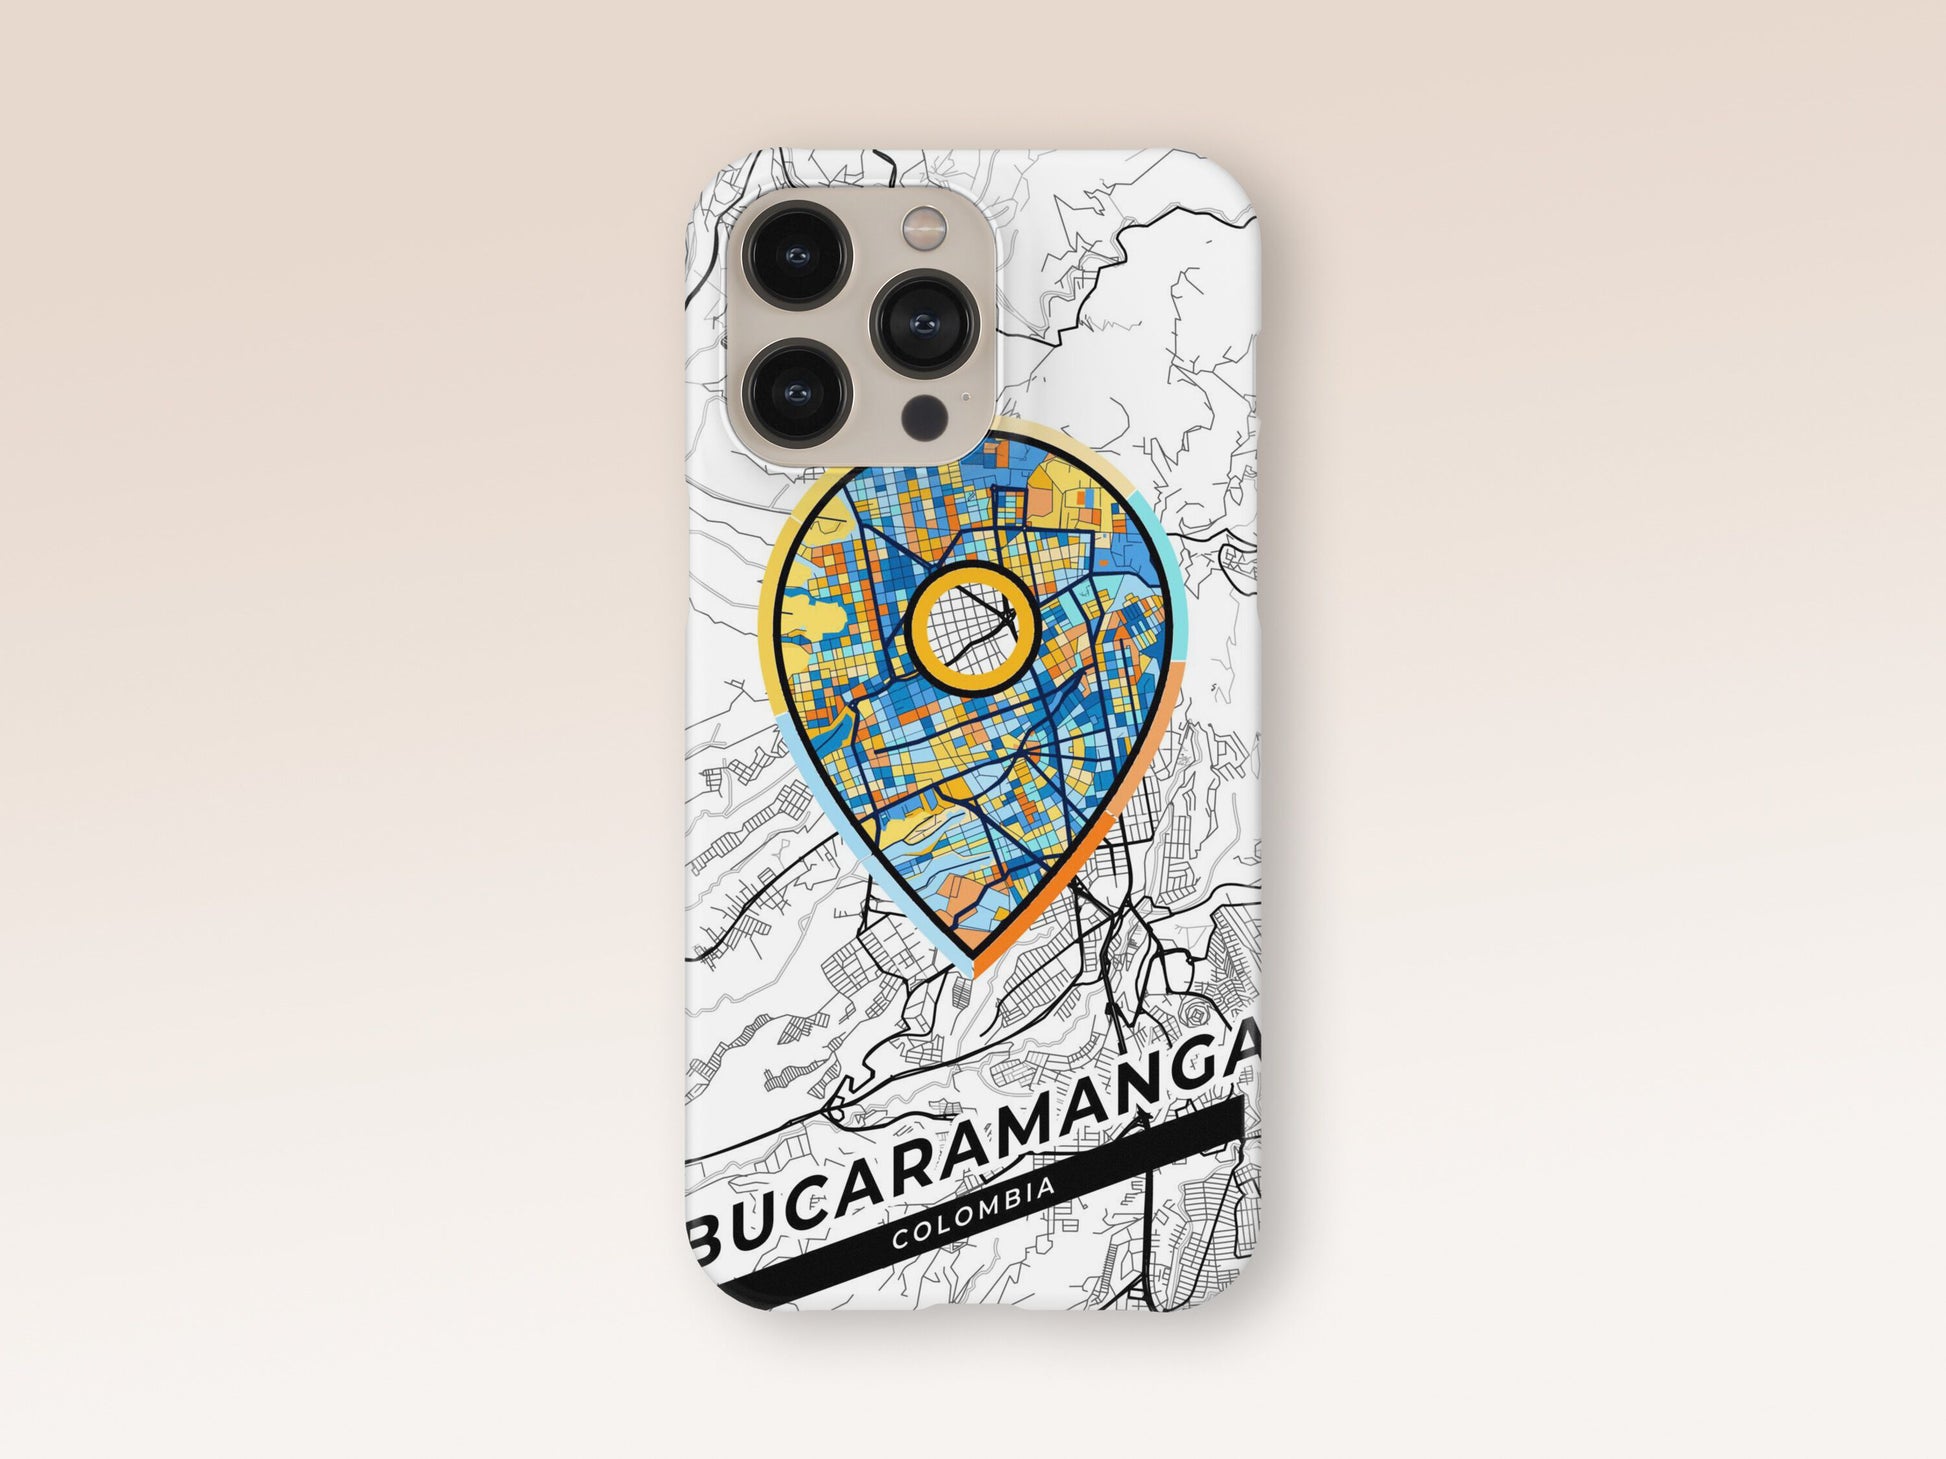 Bucaramanga Colombia slim phone case with colorful icon. Birthday, wedding or housewarming gift. Couple match cases. 1